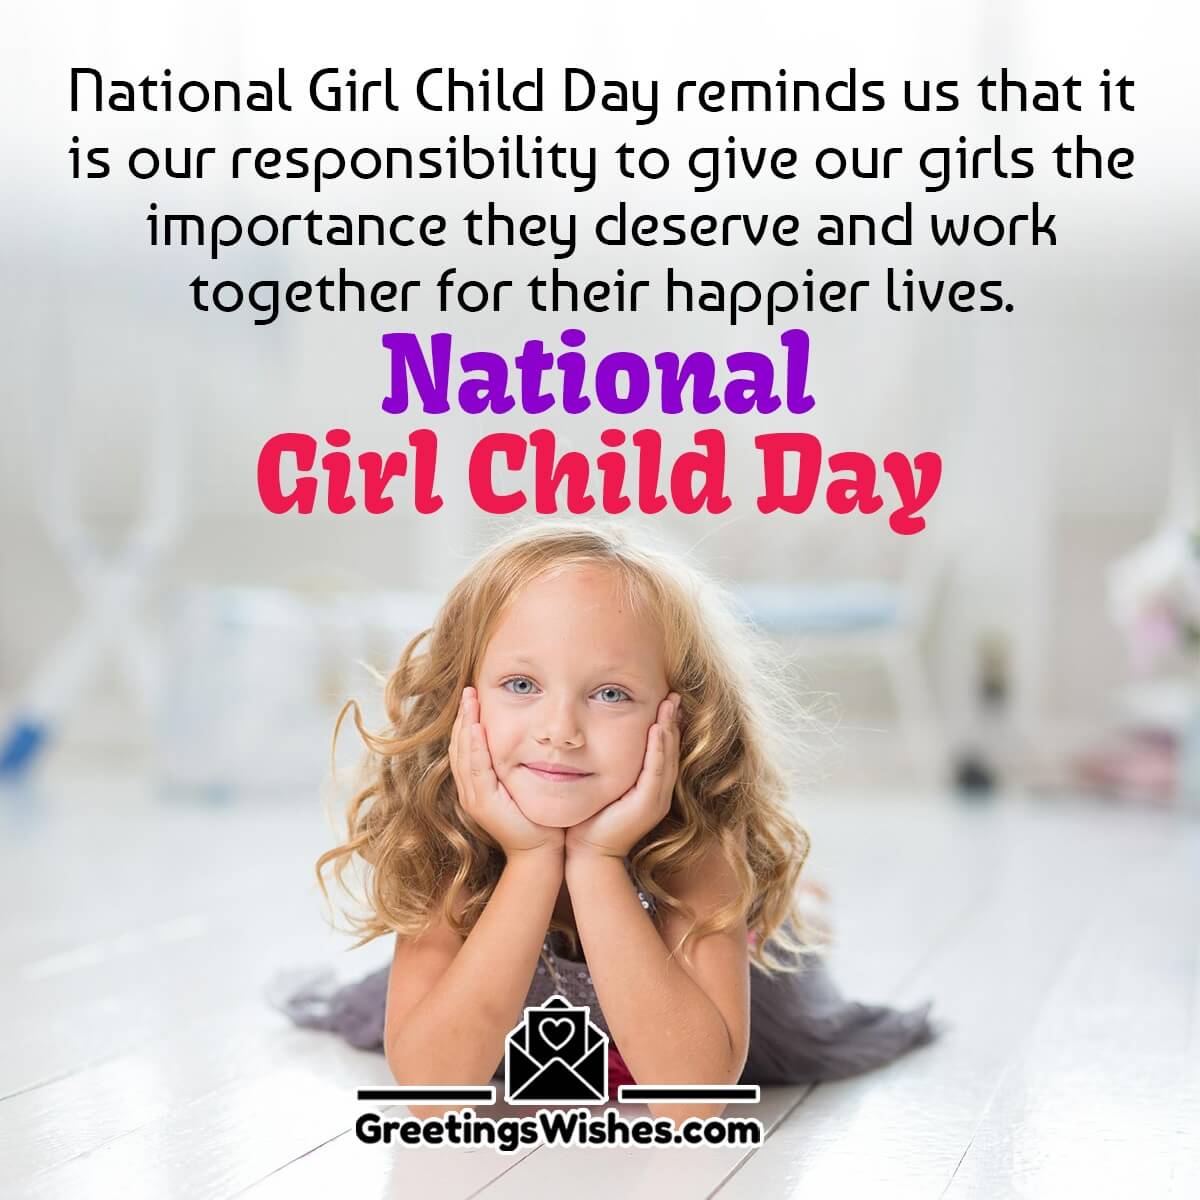 National Girl Child Day Wishes, Messages